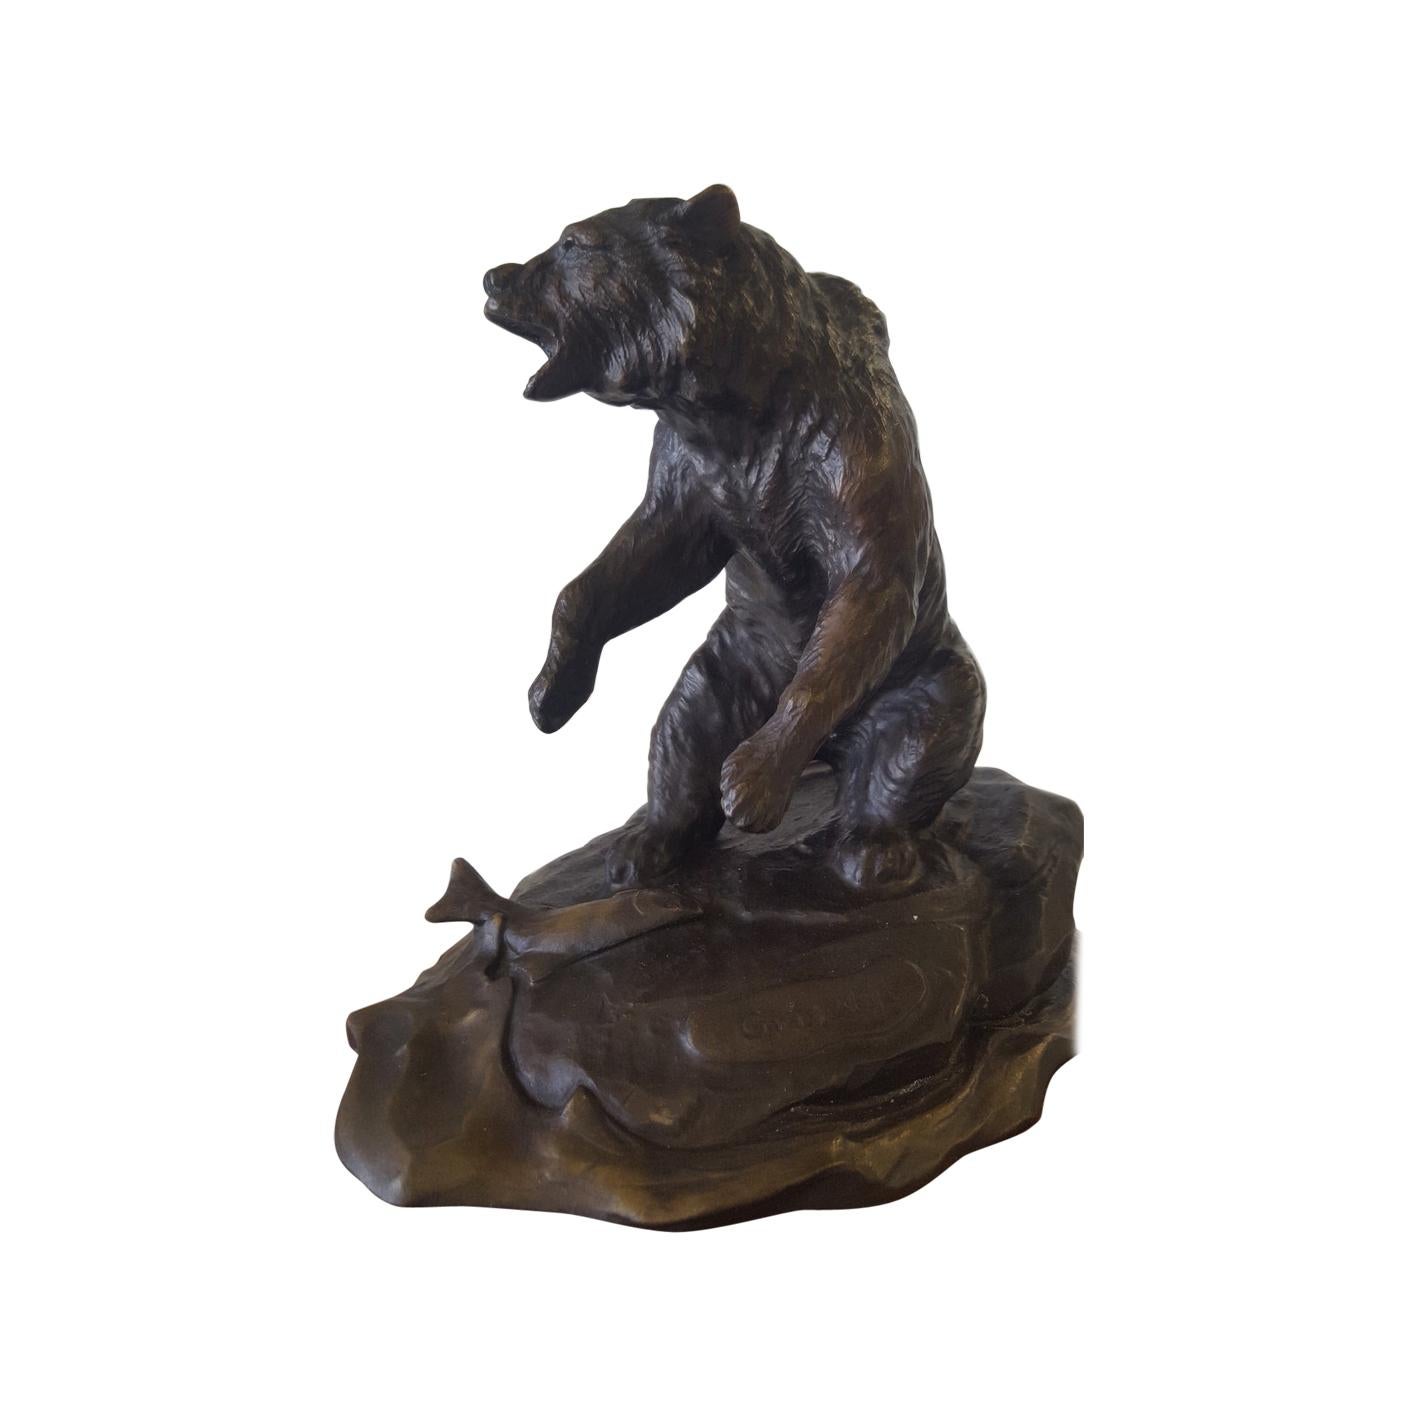 20th Century Bronze Sculpture of a Grizzly Bear by Clark Everice Bronson